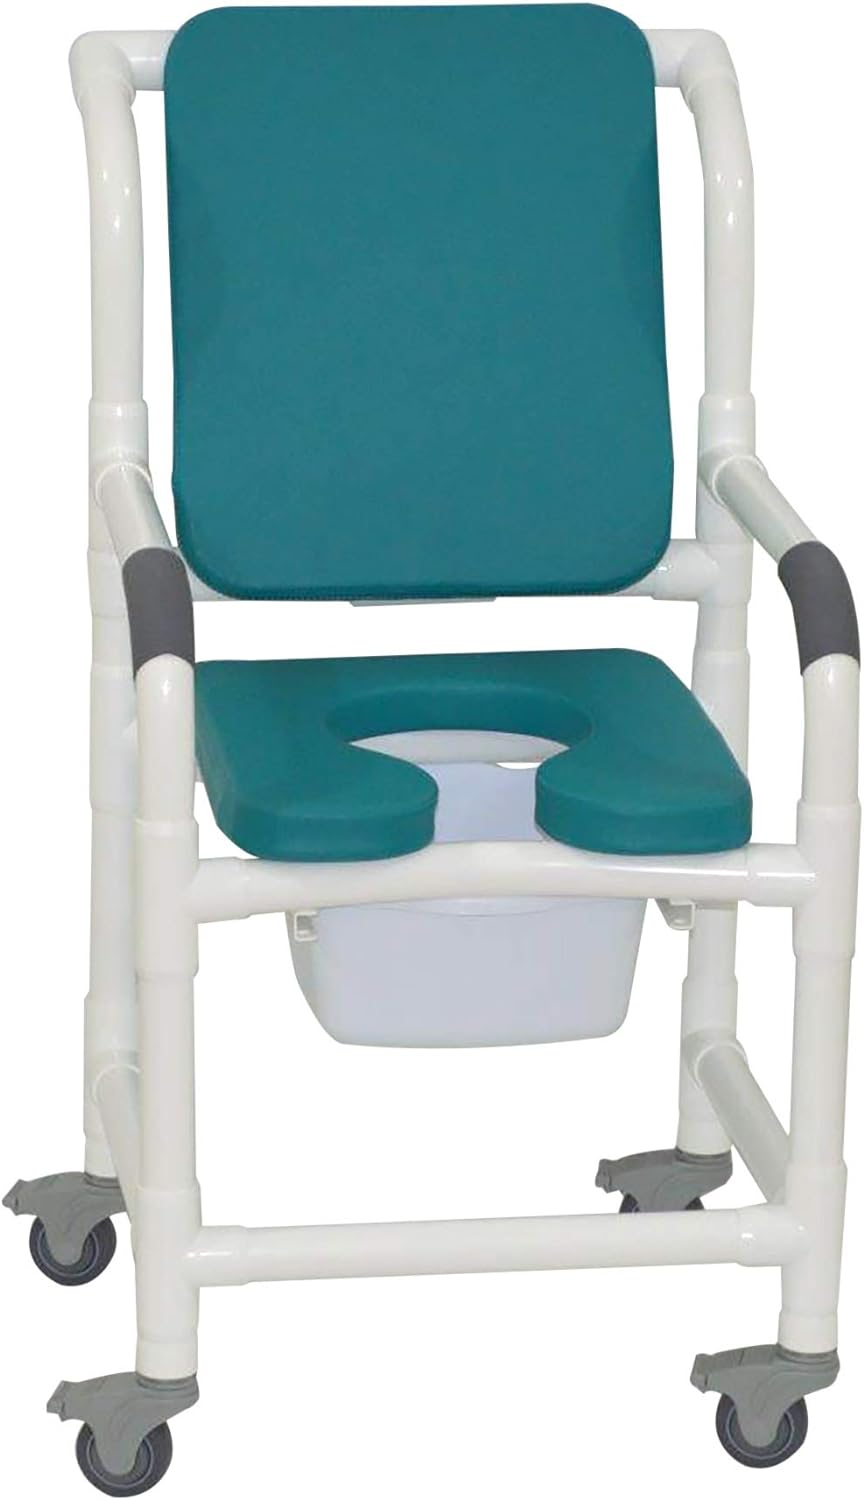 MJM International Corp. Shower chair 18Inch internal width 3Inch total locking casters OCEAN BLUE deluxe elongated open front soft seat OCEAN BLUE cushi